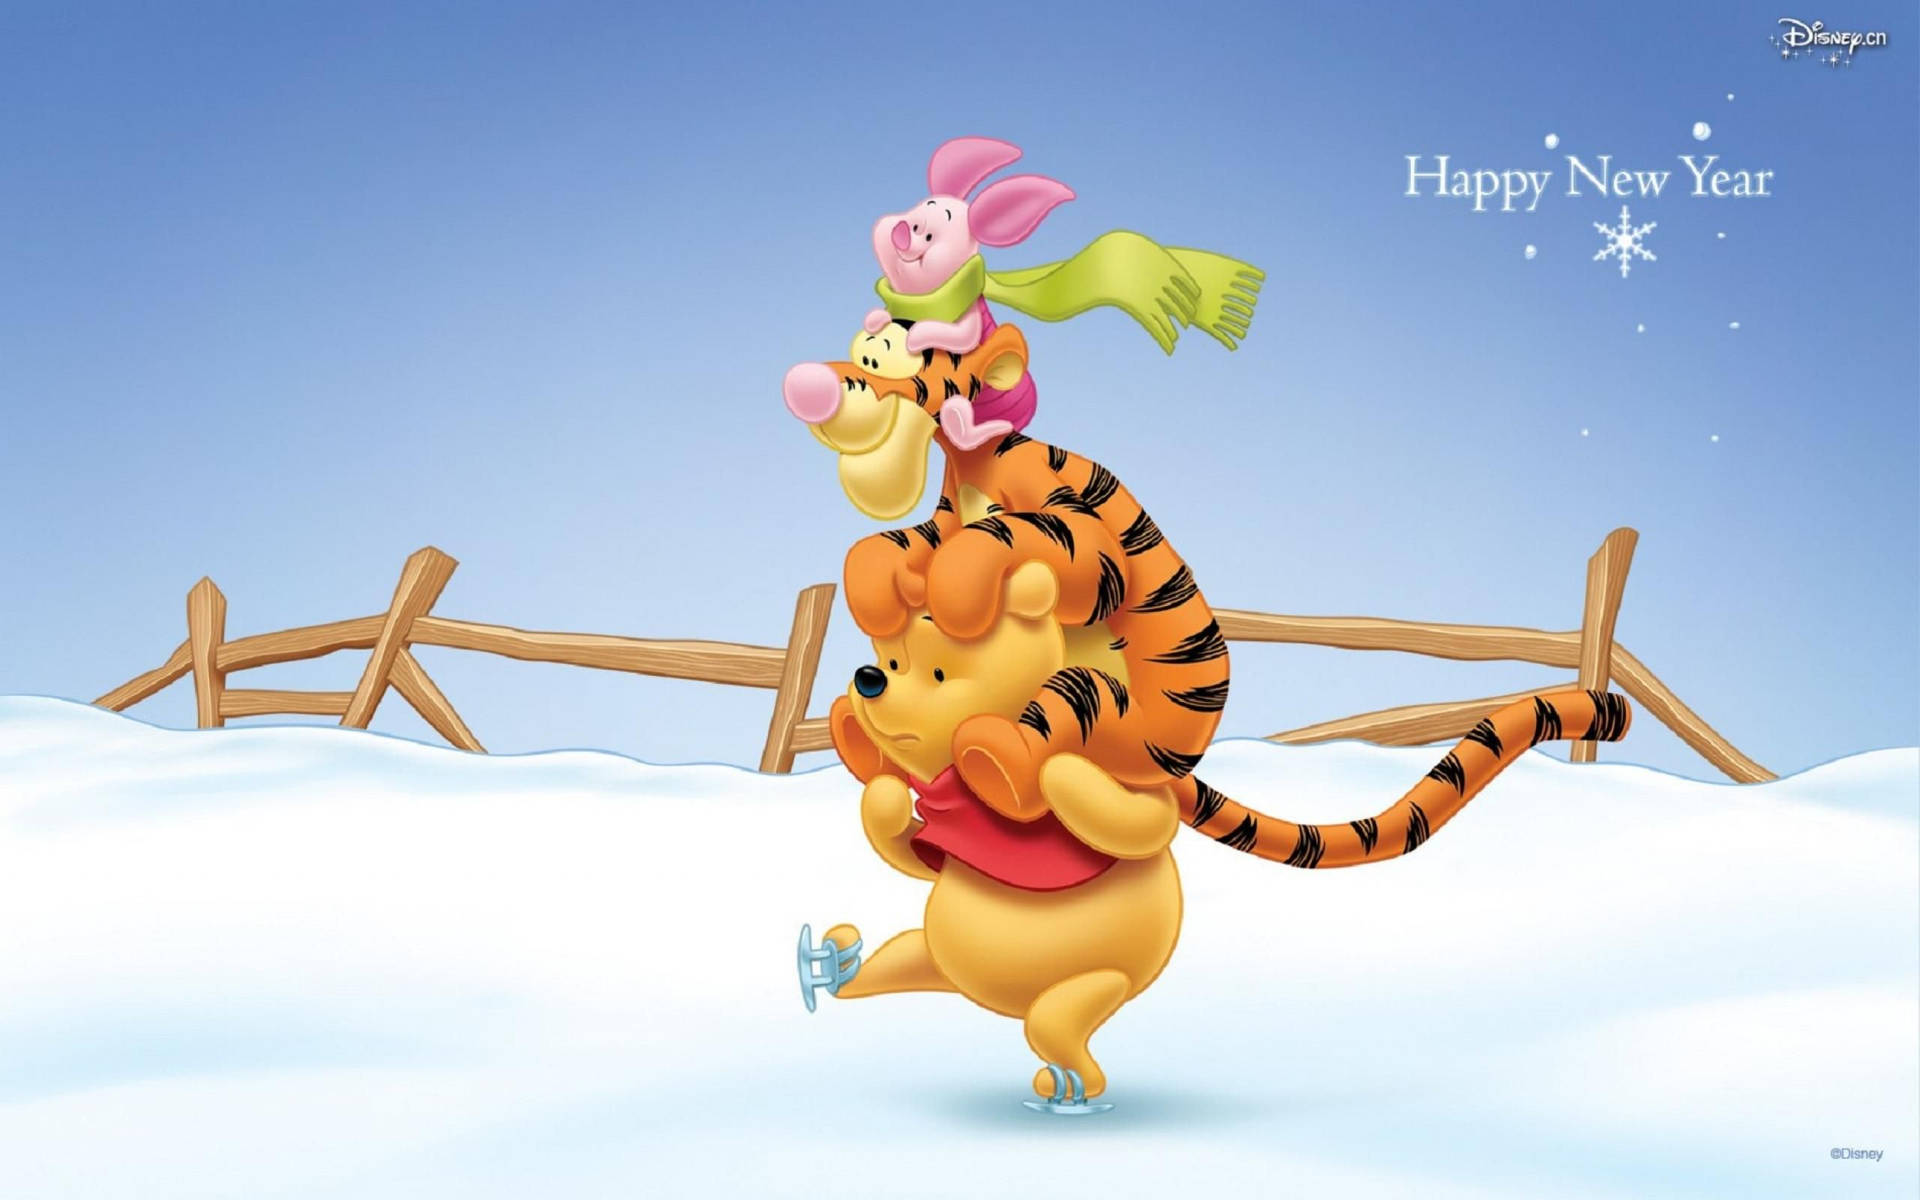 Pooh Wishes You A Happy New Year! Wallpaper